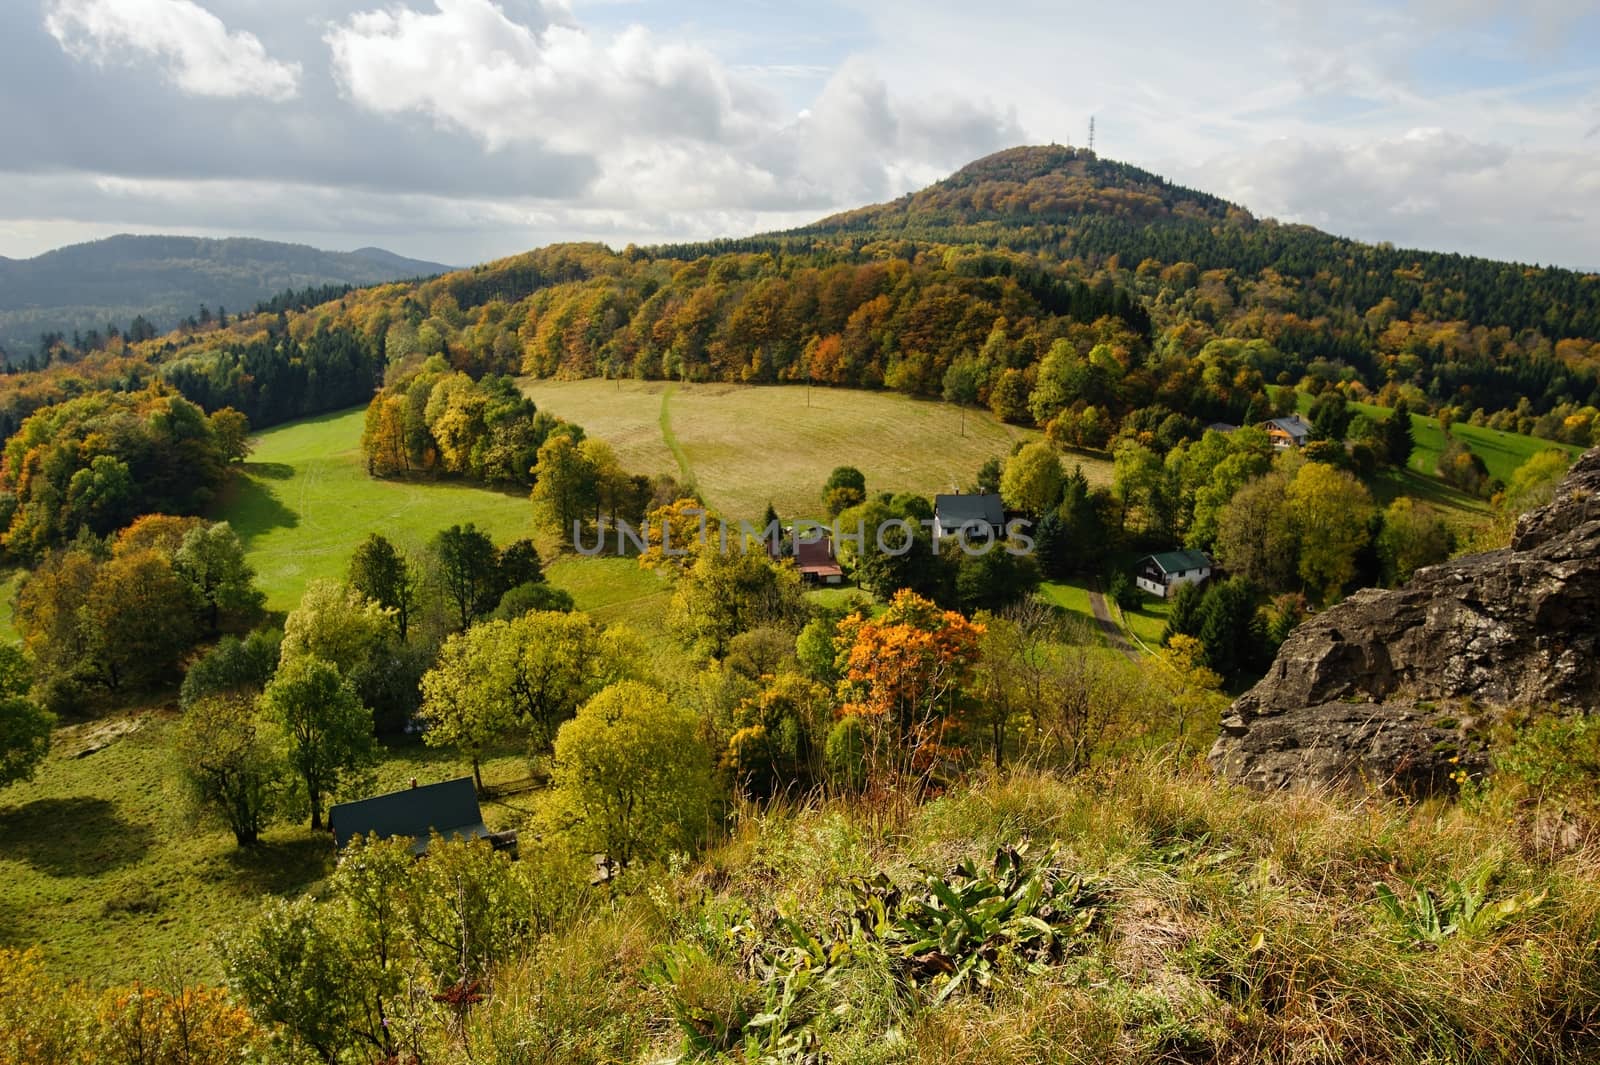 Autumn colorful landscape with forests, hills, sun and sky